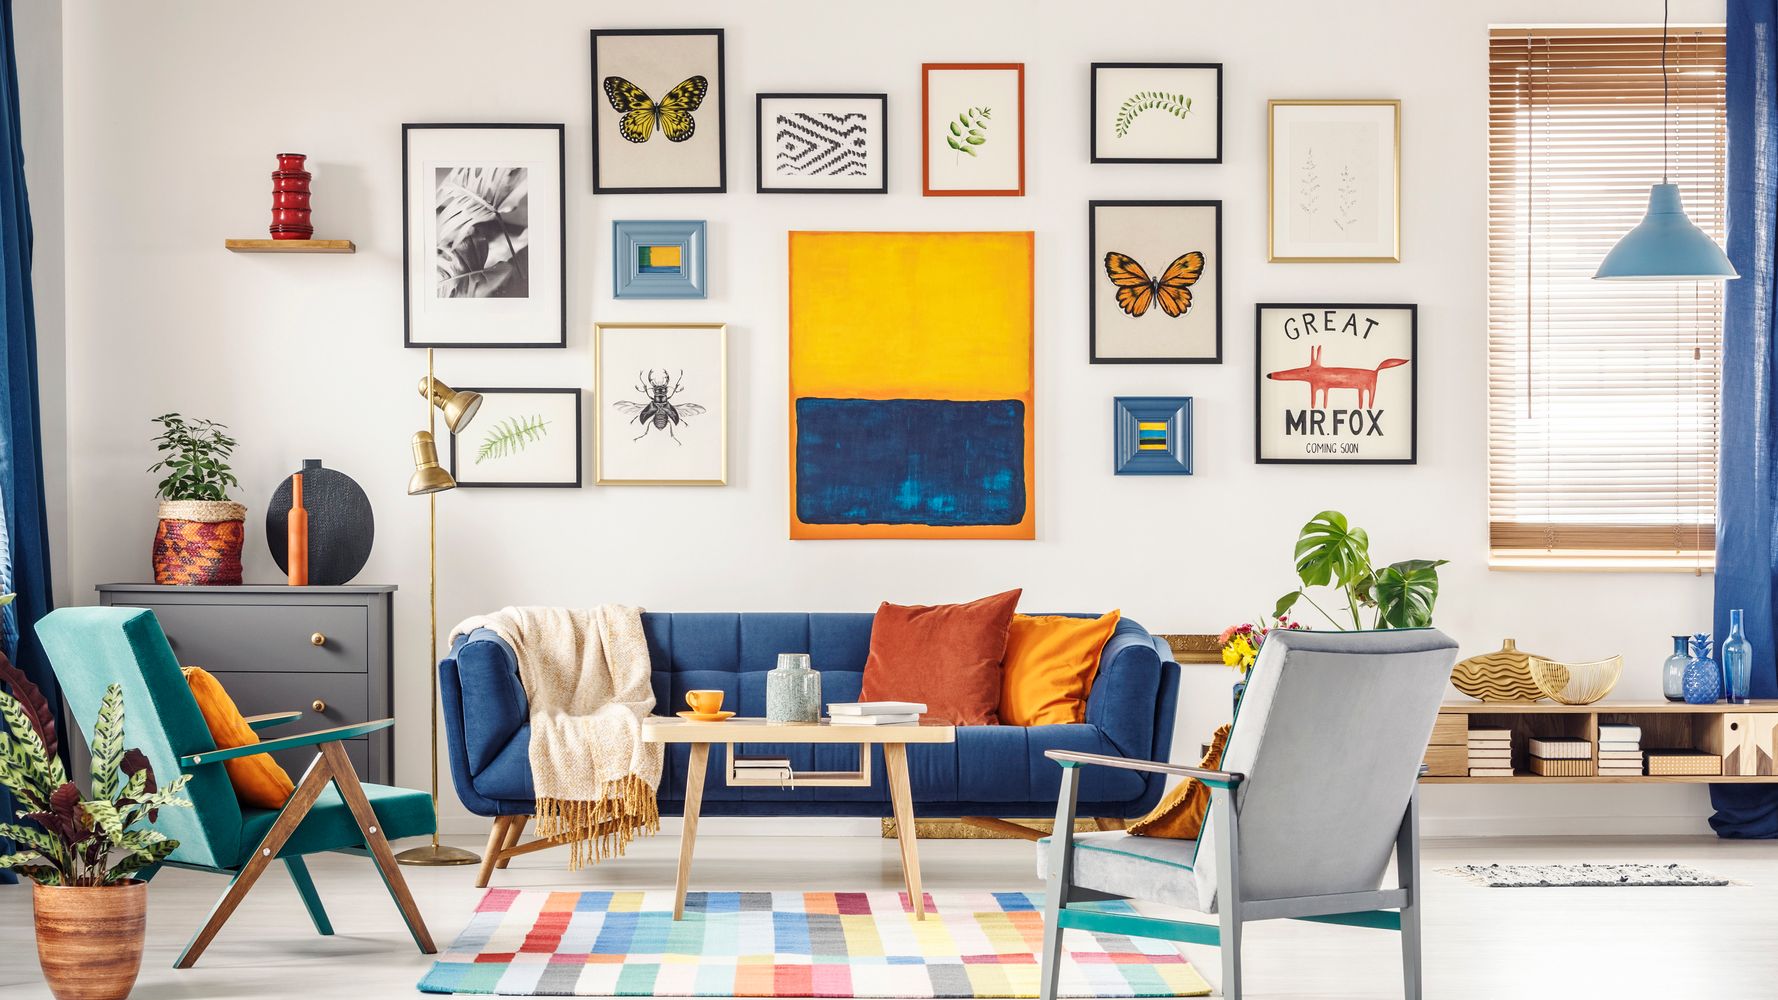 How To Create A Gallery Wall Interior Designers Share Their Top Tips